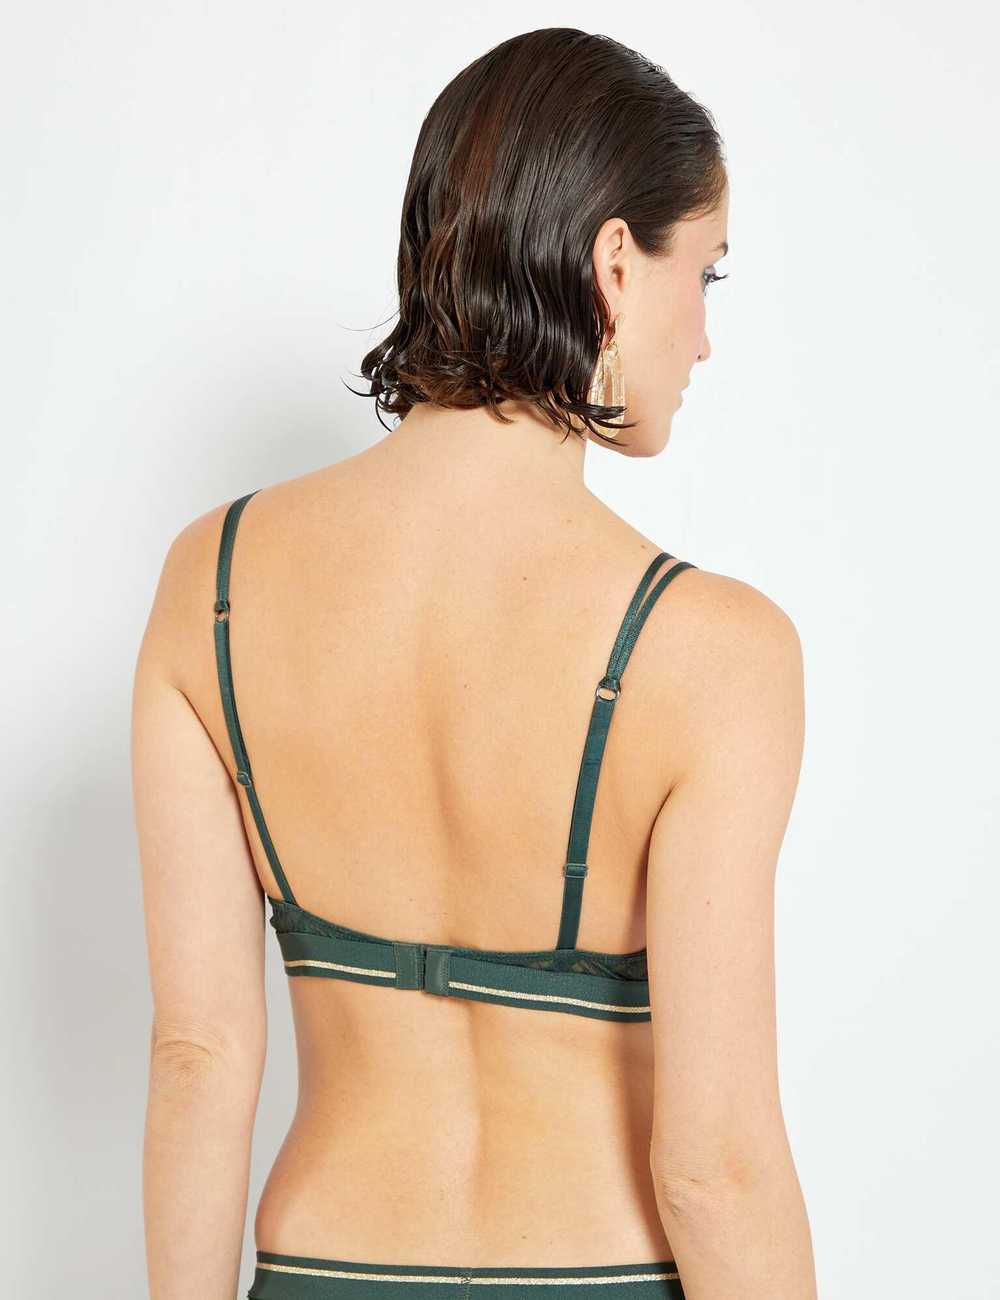 Buy Triangle bra with removable padding Online in Dubai & the UAE